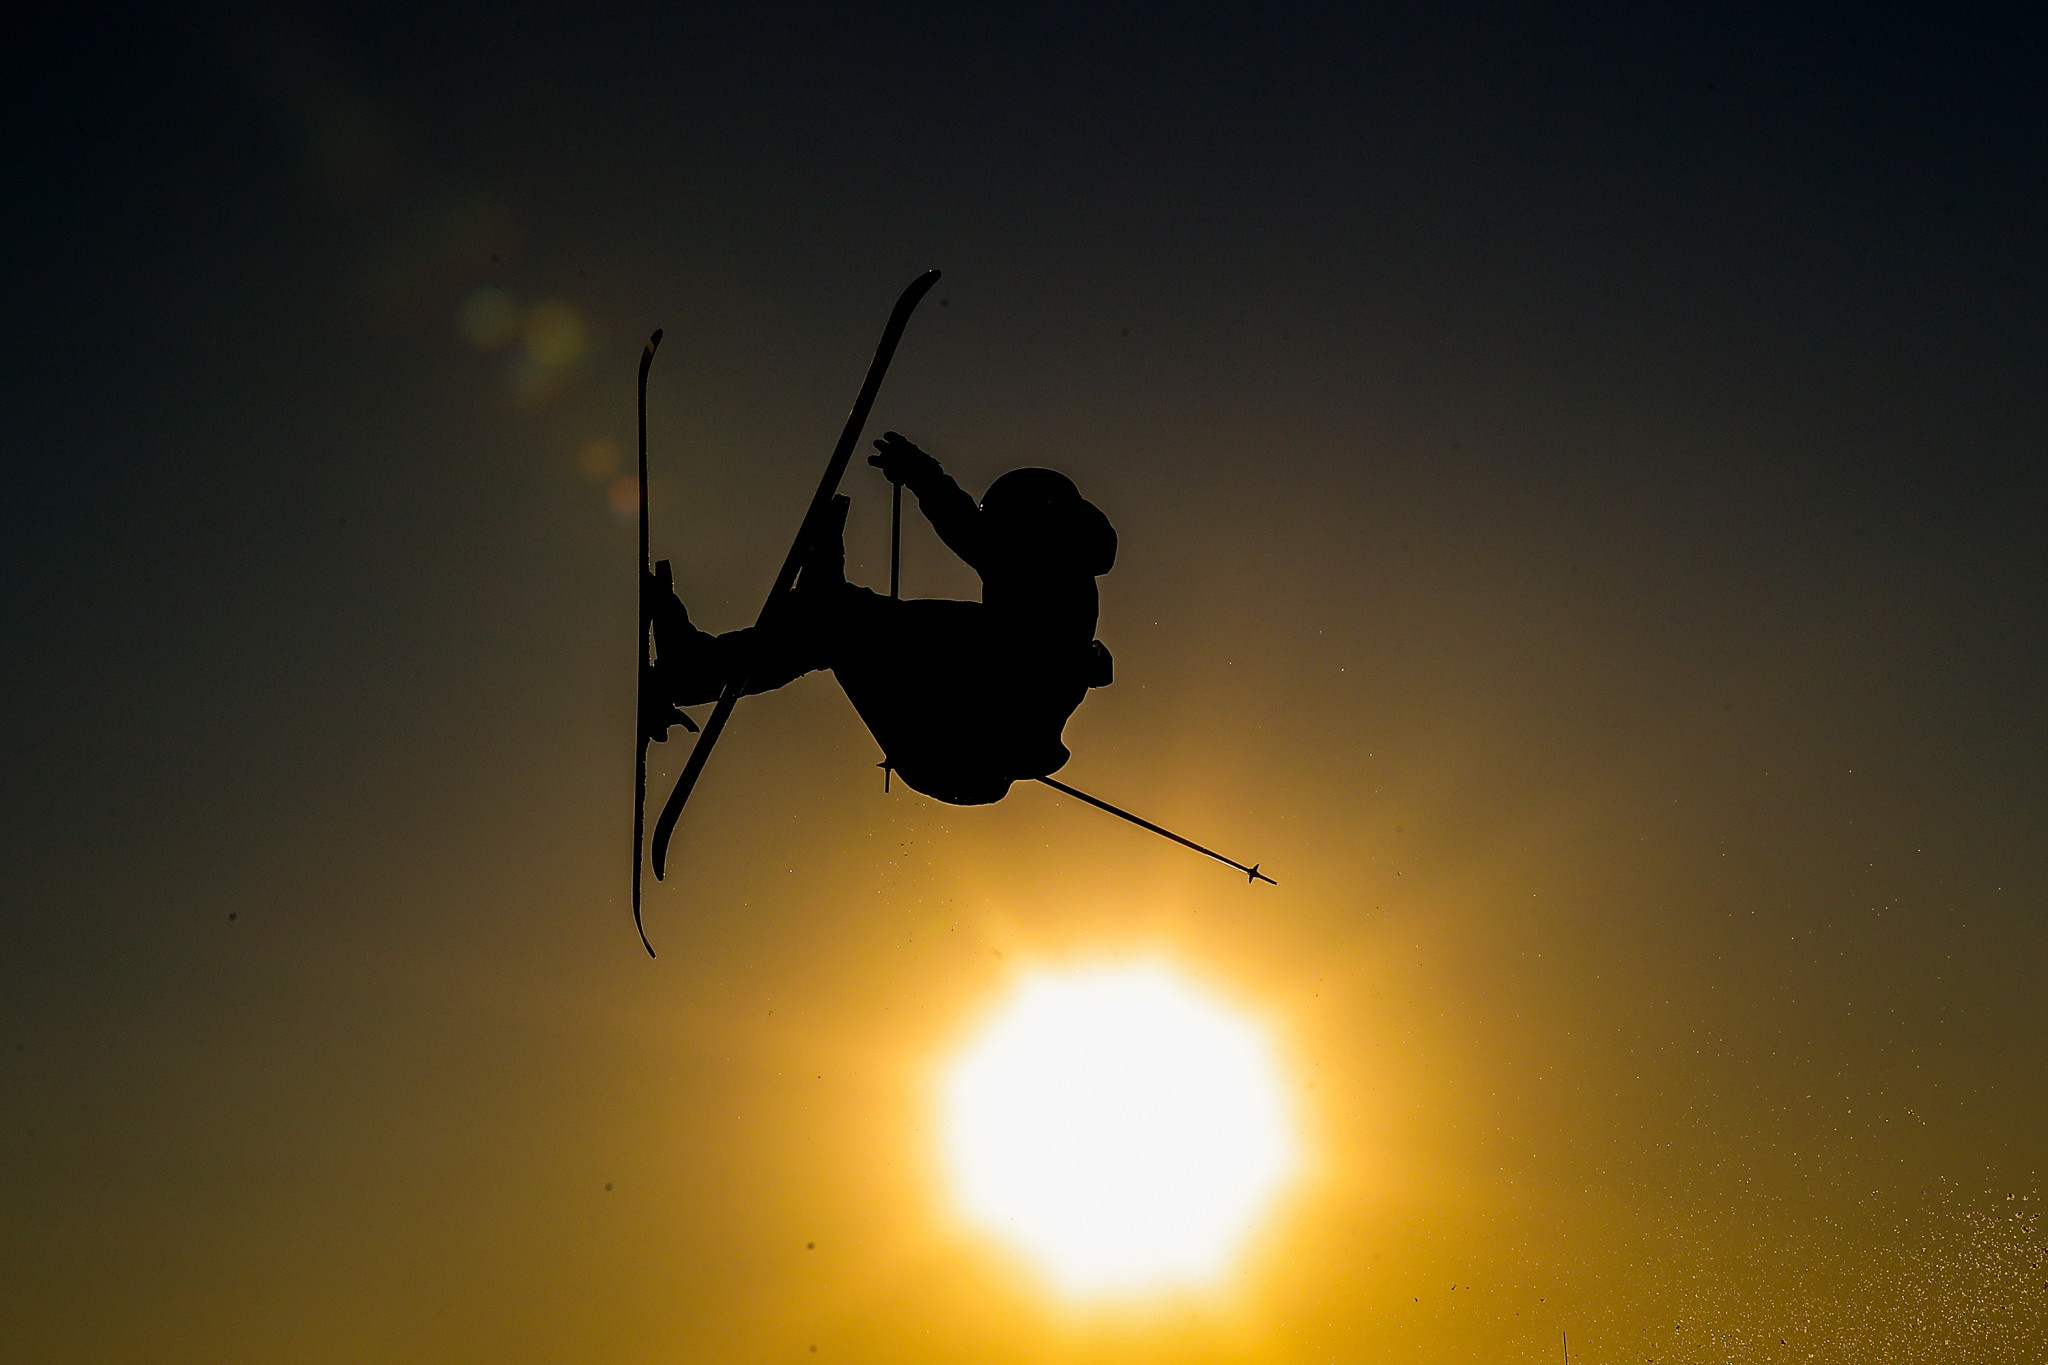 Double gold for Norway at FIS Freestyle Skiing Big Air World Cup in Beijing